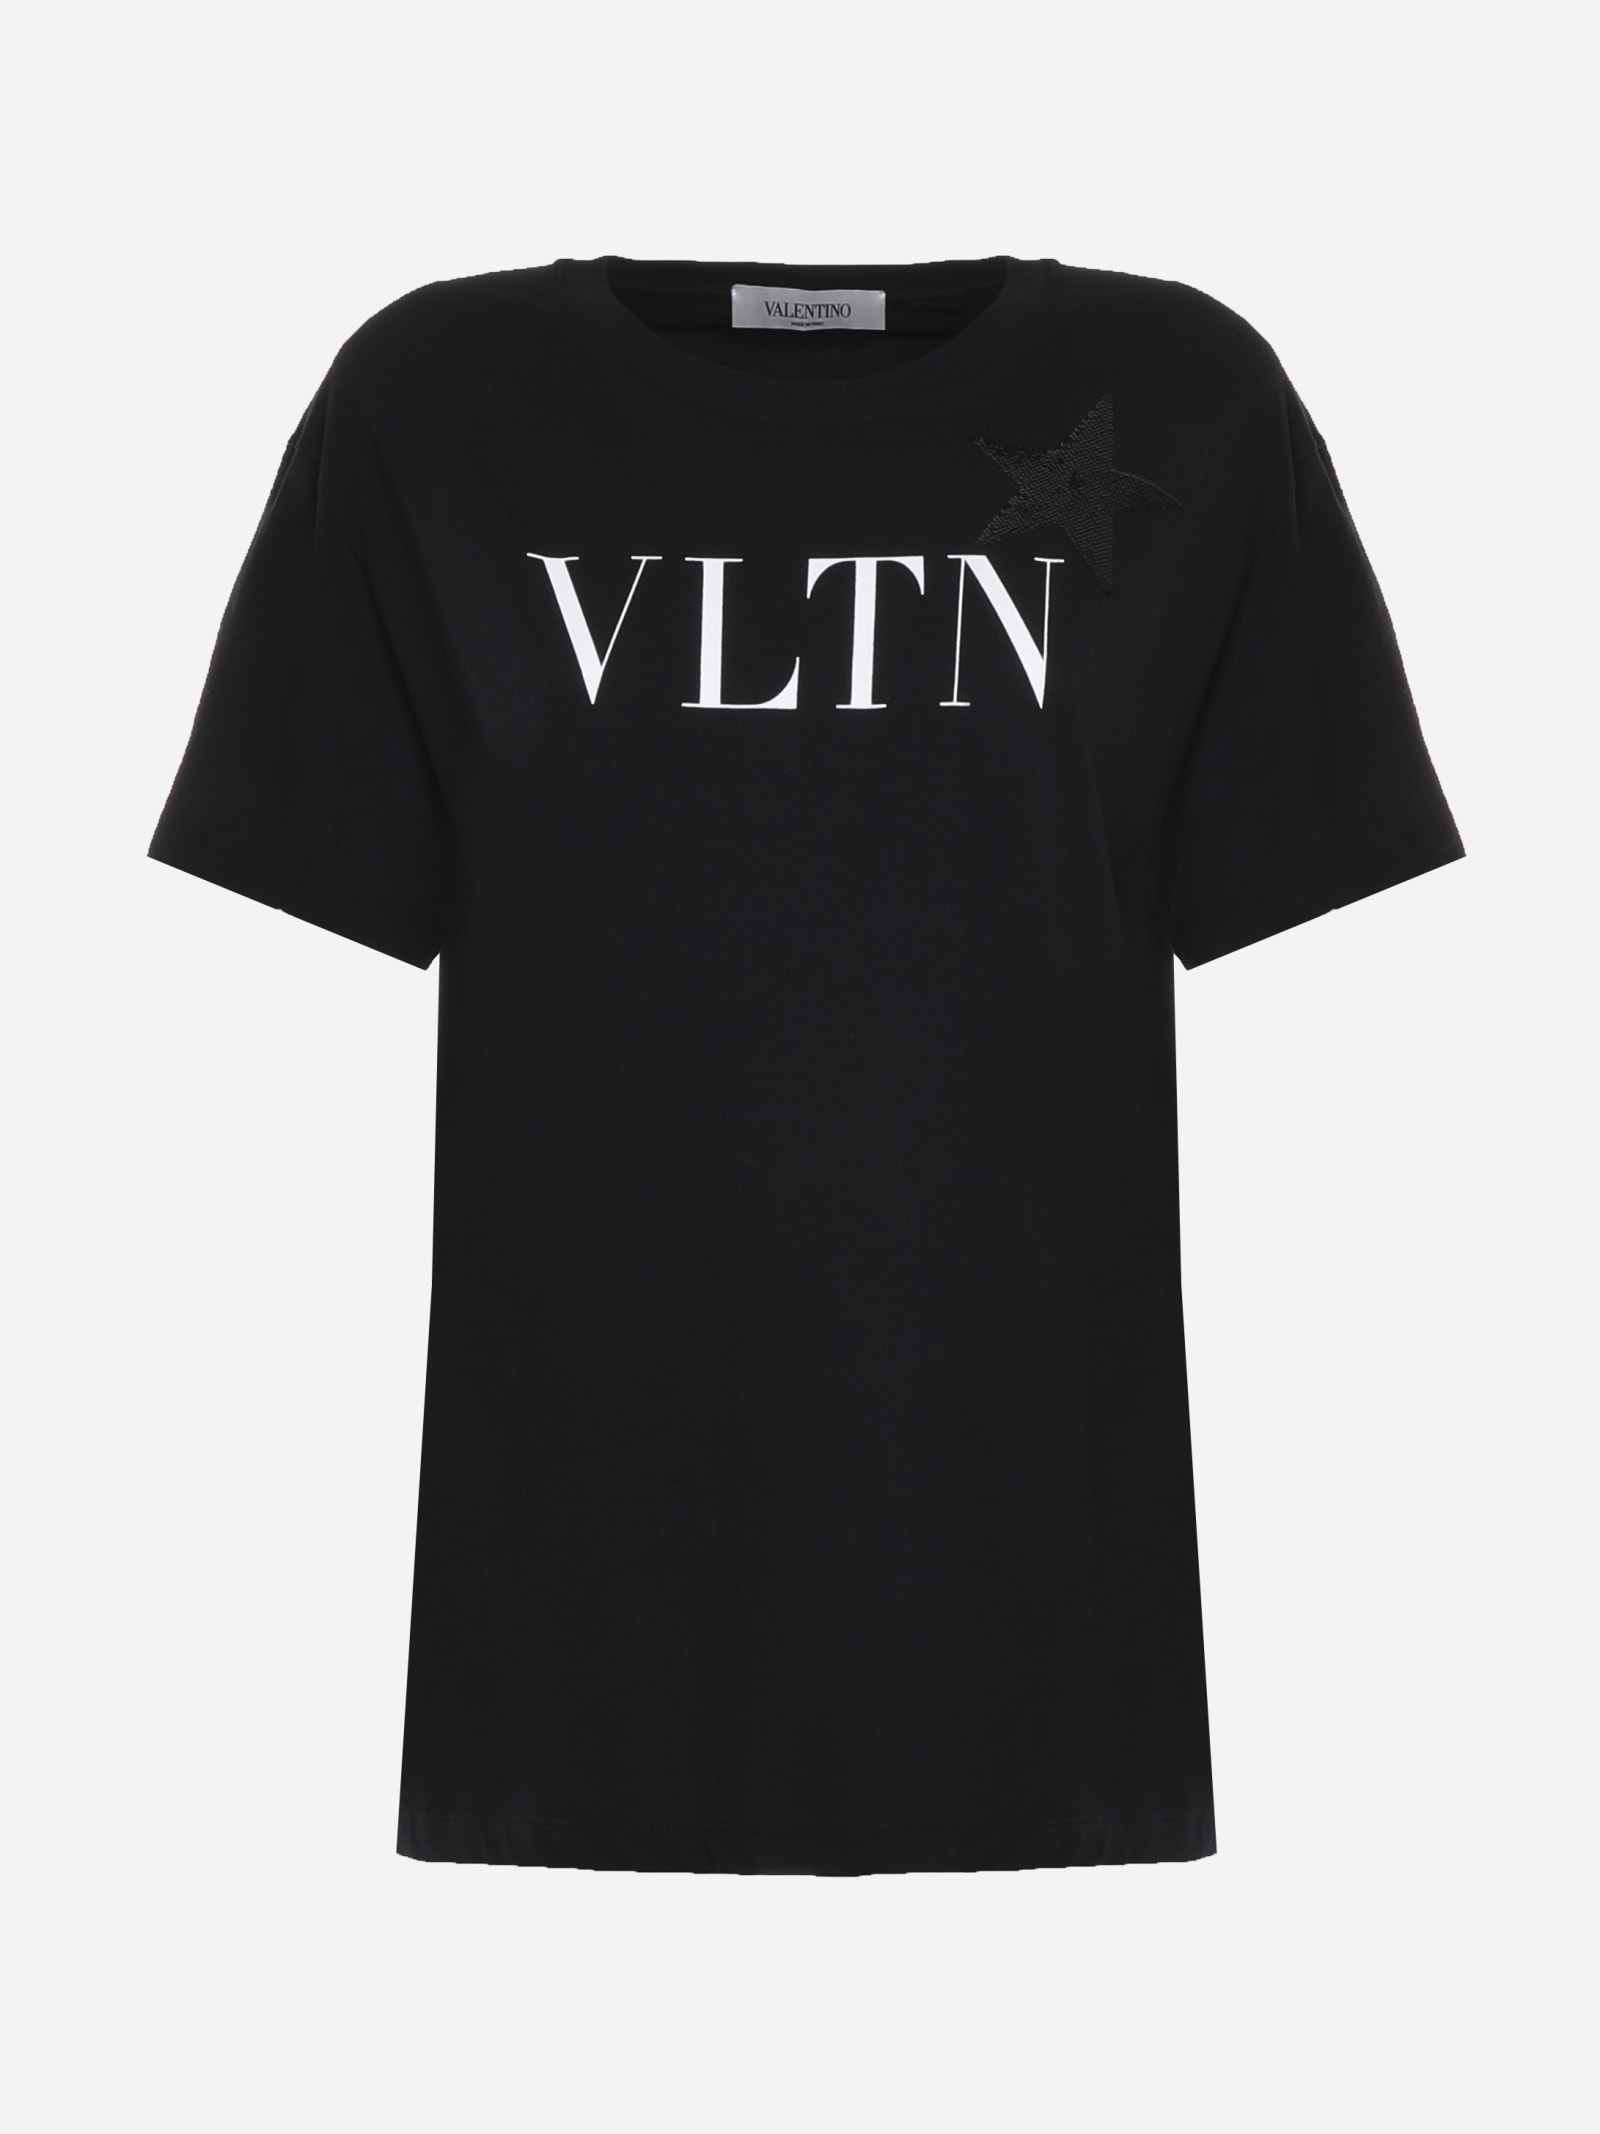 Valentino Cotton T-shirt With Contrasting Vltn Print